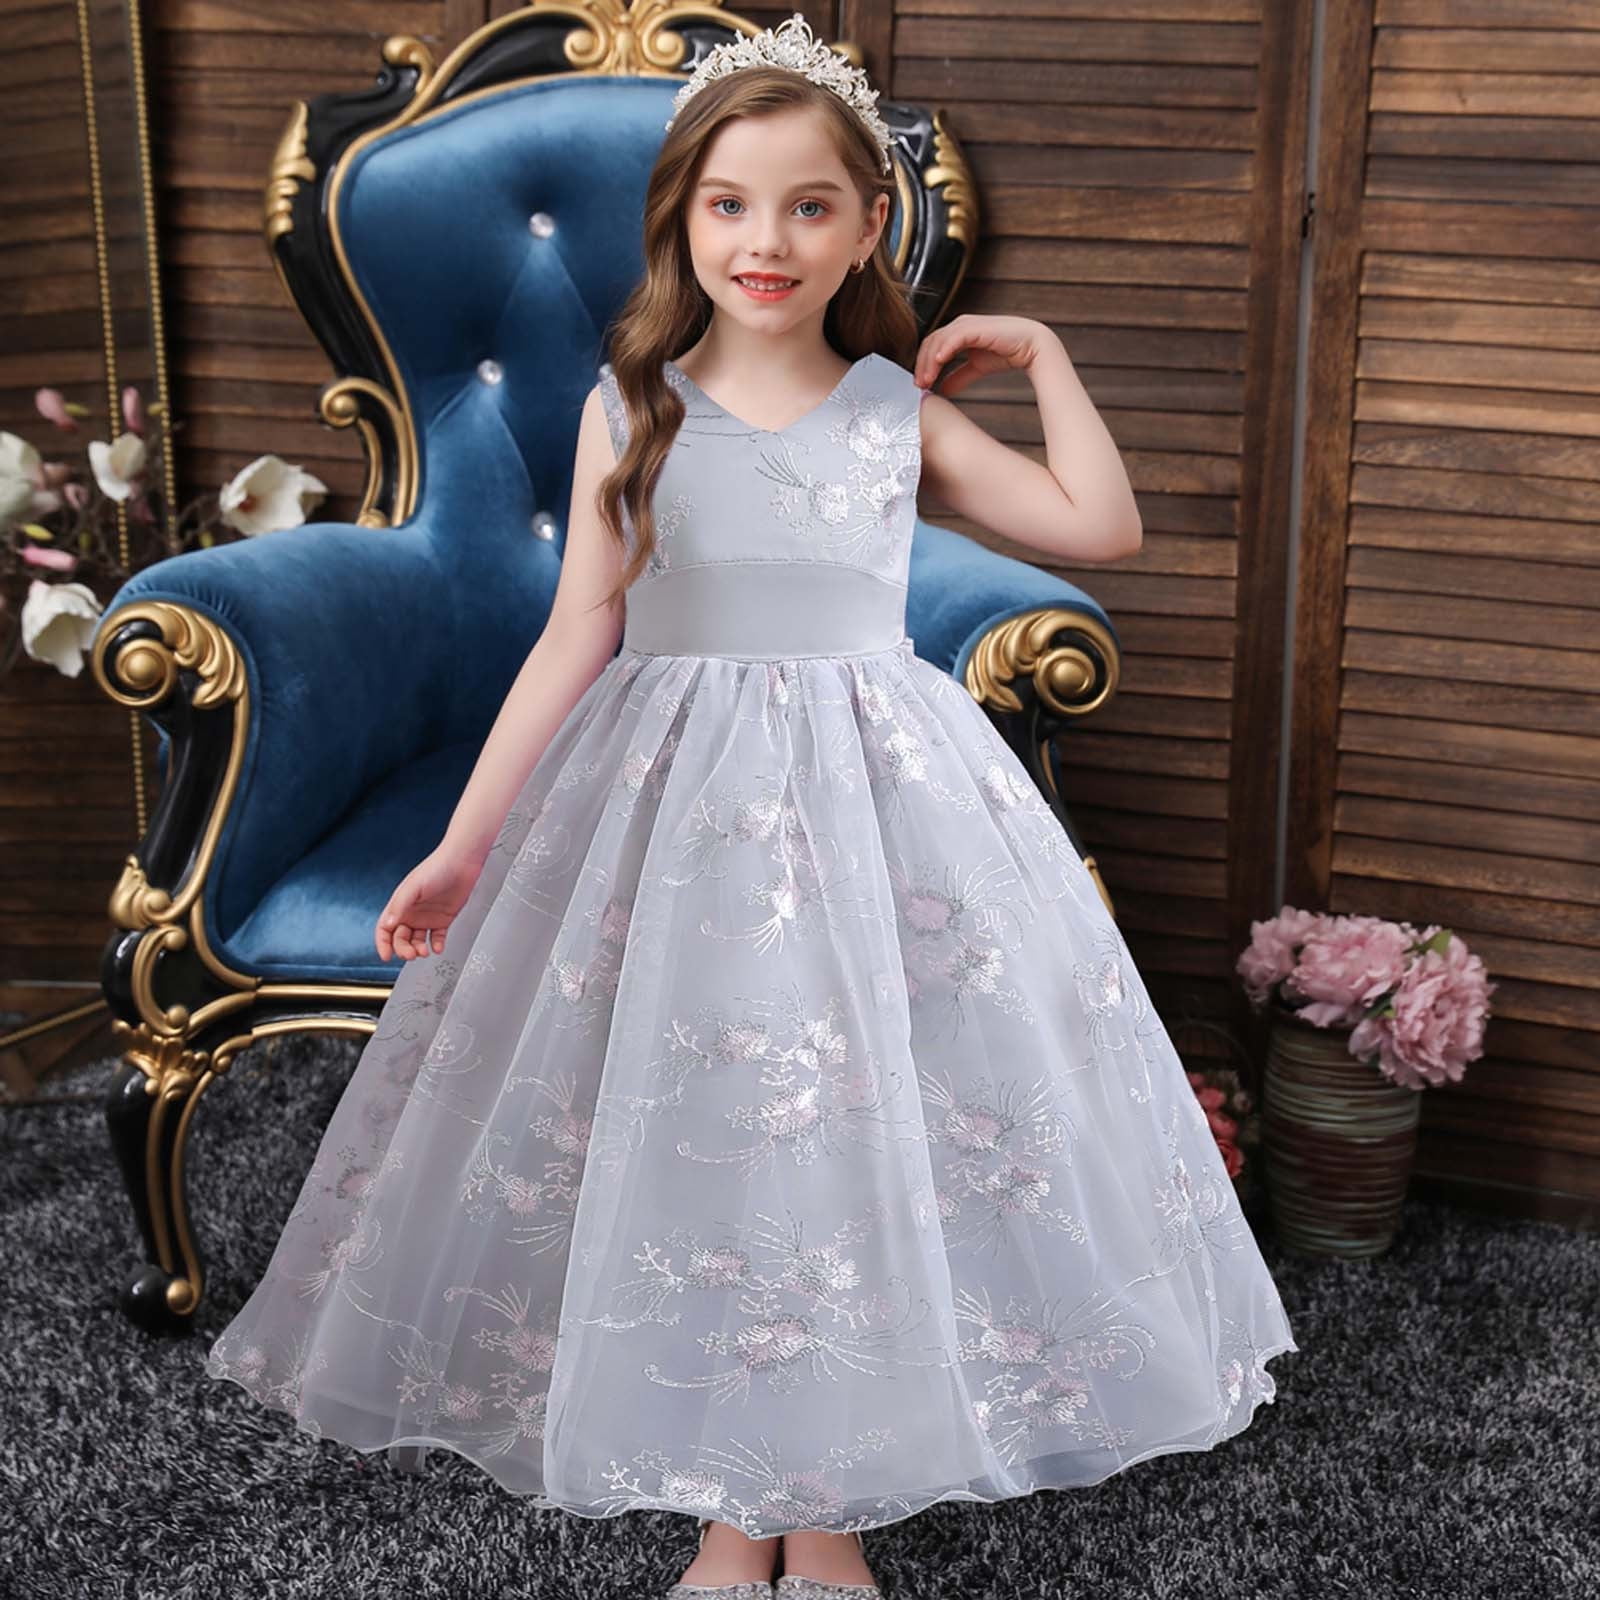 IBTOM CASTLE Flower Girl Velvet Floral Gradient Sequins Dress for Kids  Wedding Bridesmaid Pageant Communion Formal Princess Puffy Gown 9-10 Years  Green 